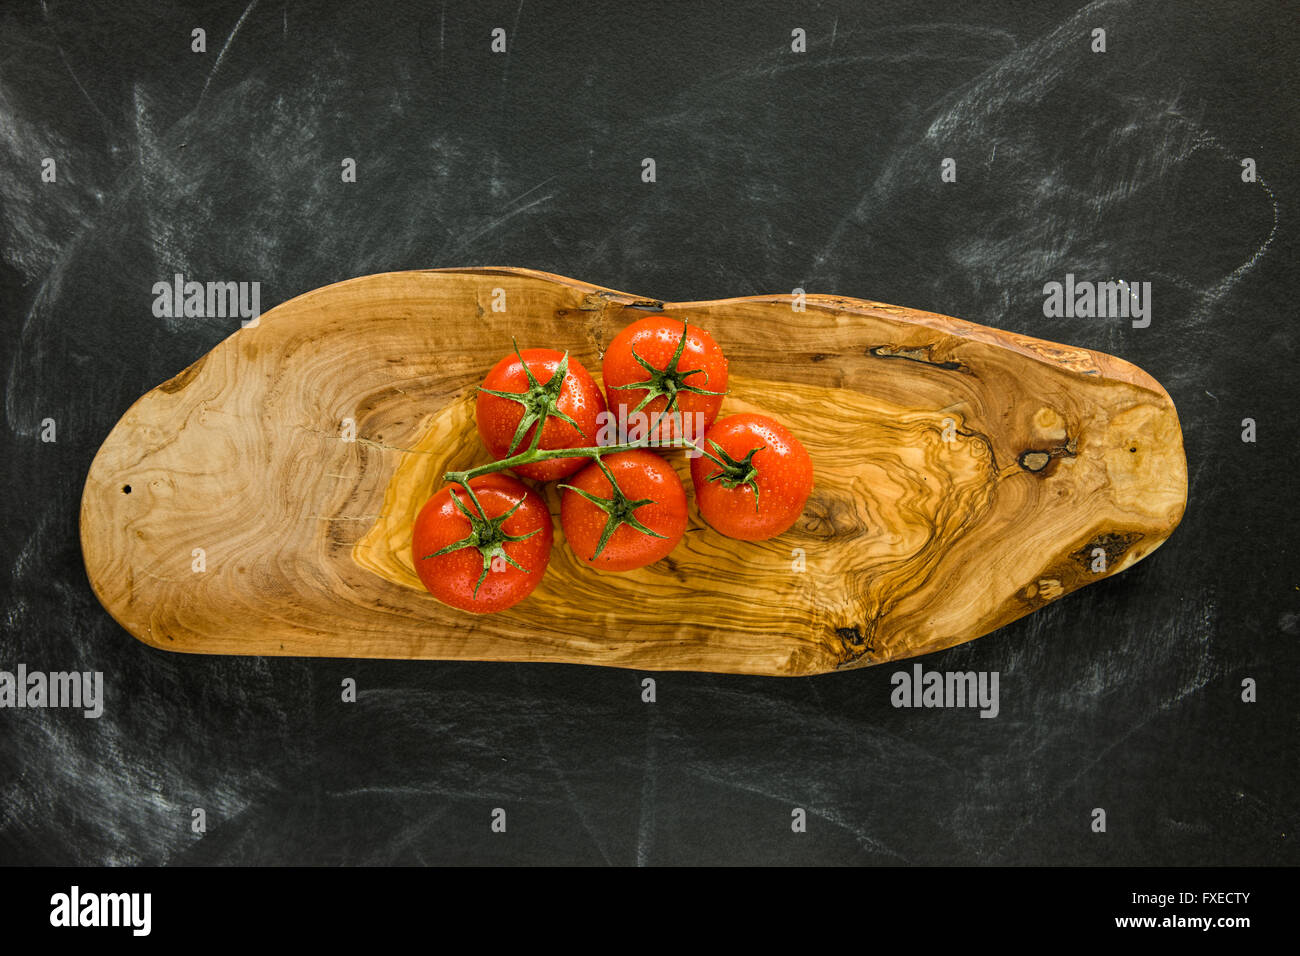 Bunch of tomatoes on wooden cutting board. Stock Photo